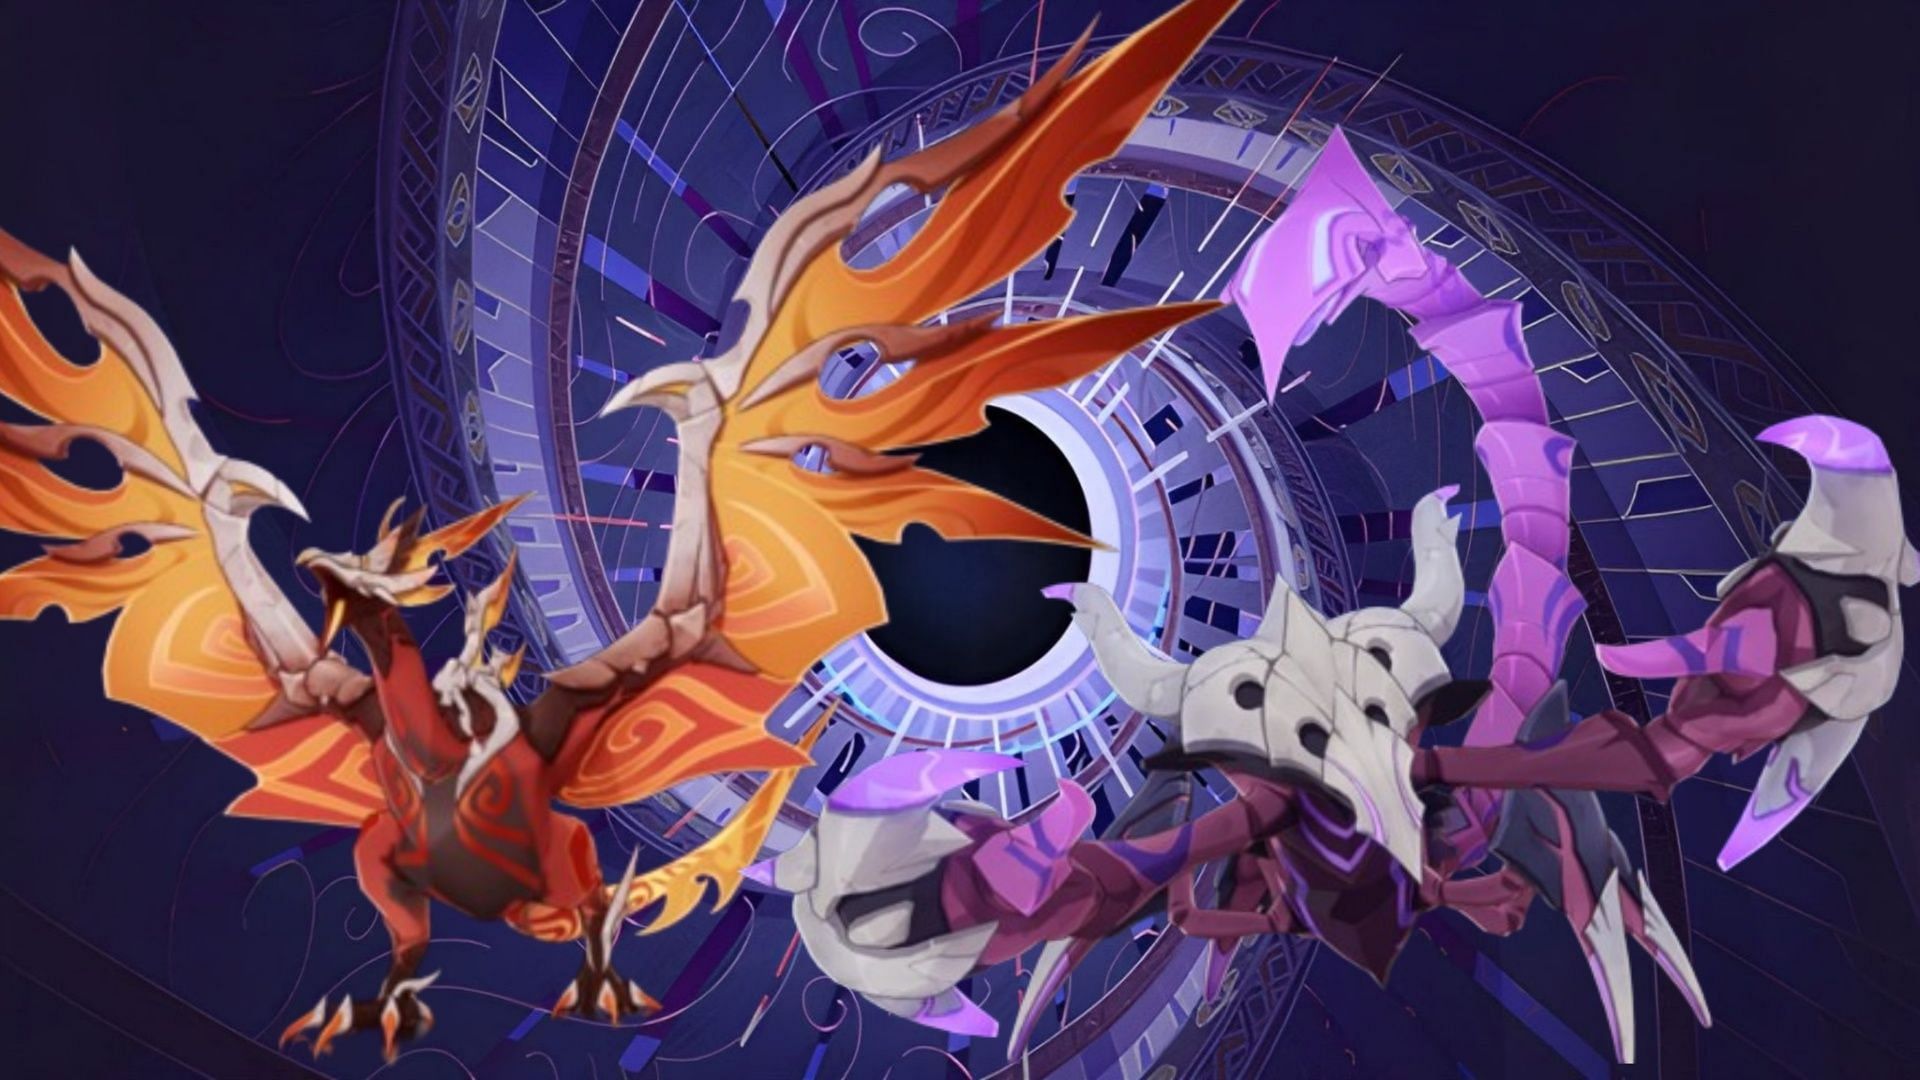 Genshin Impact 4.7 Spiral Abyss line up and blessings leaks (Image via HoYoverse)